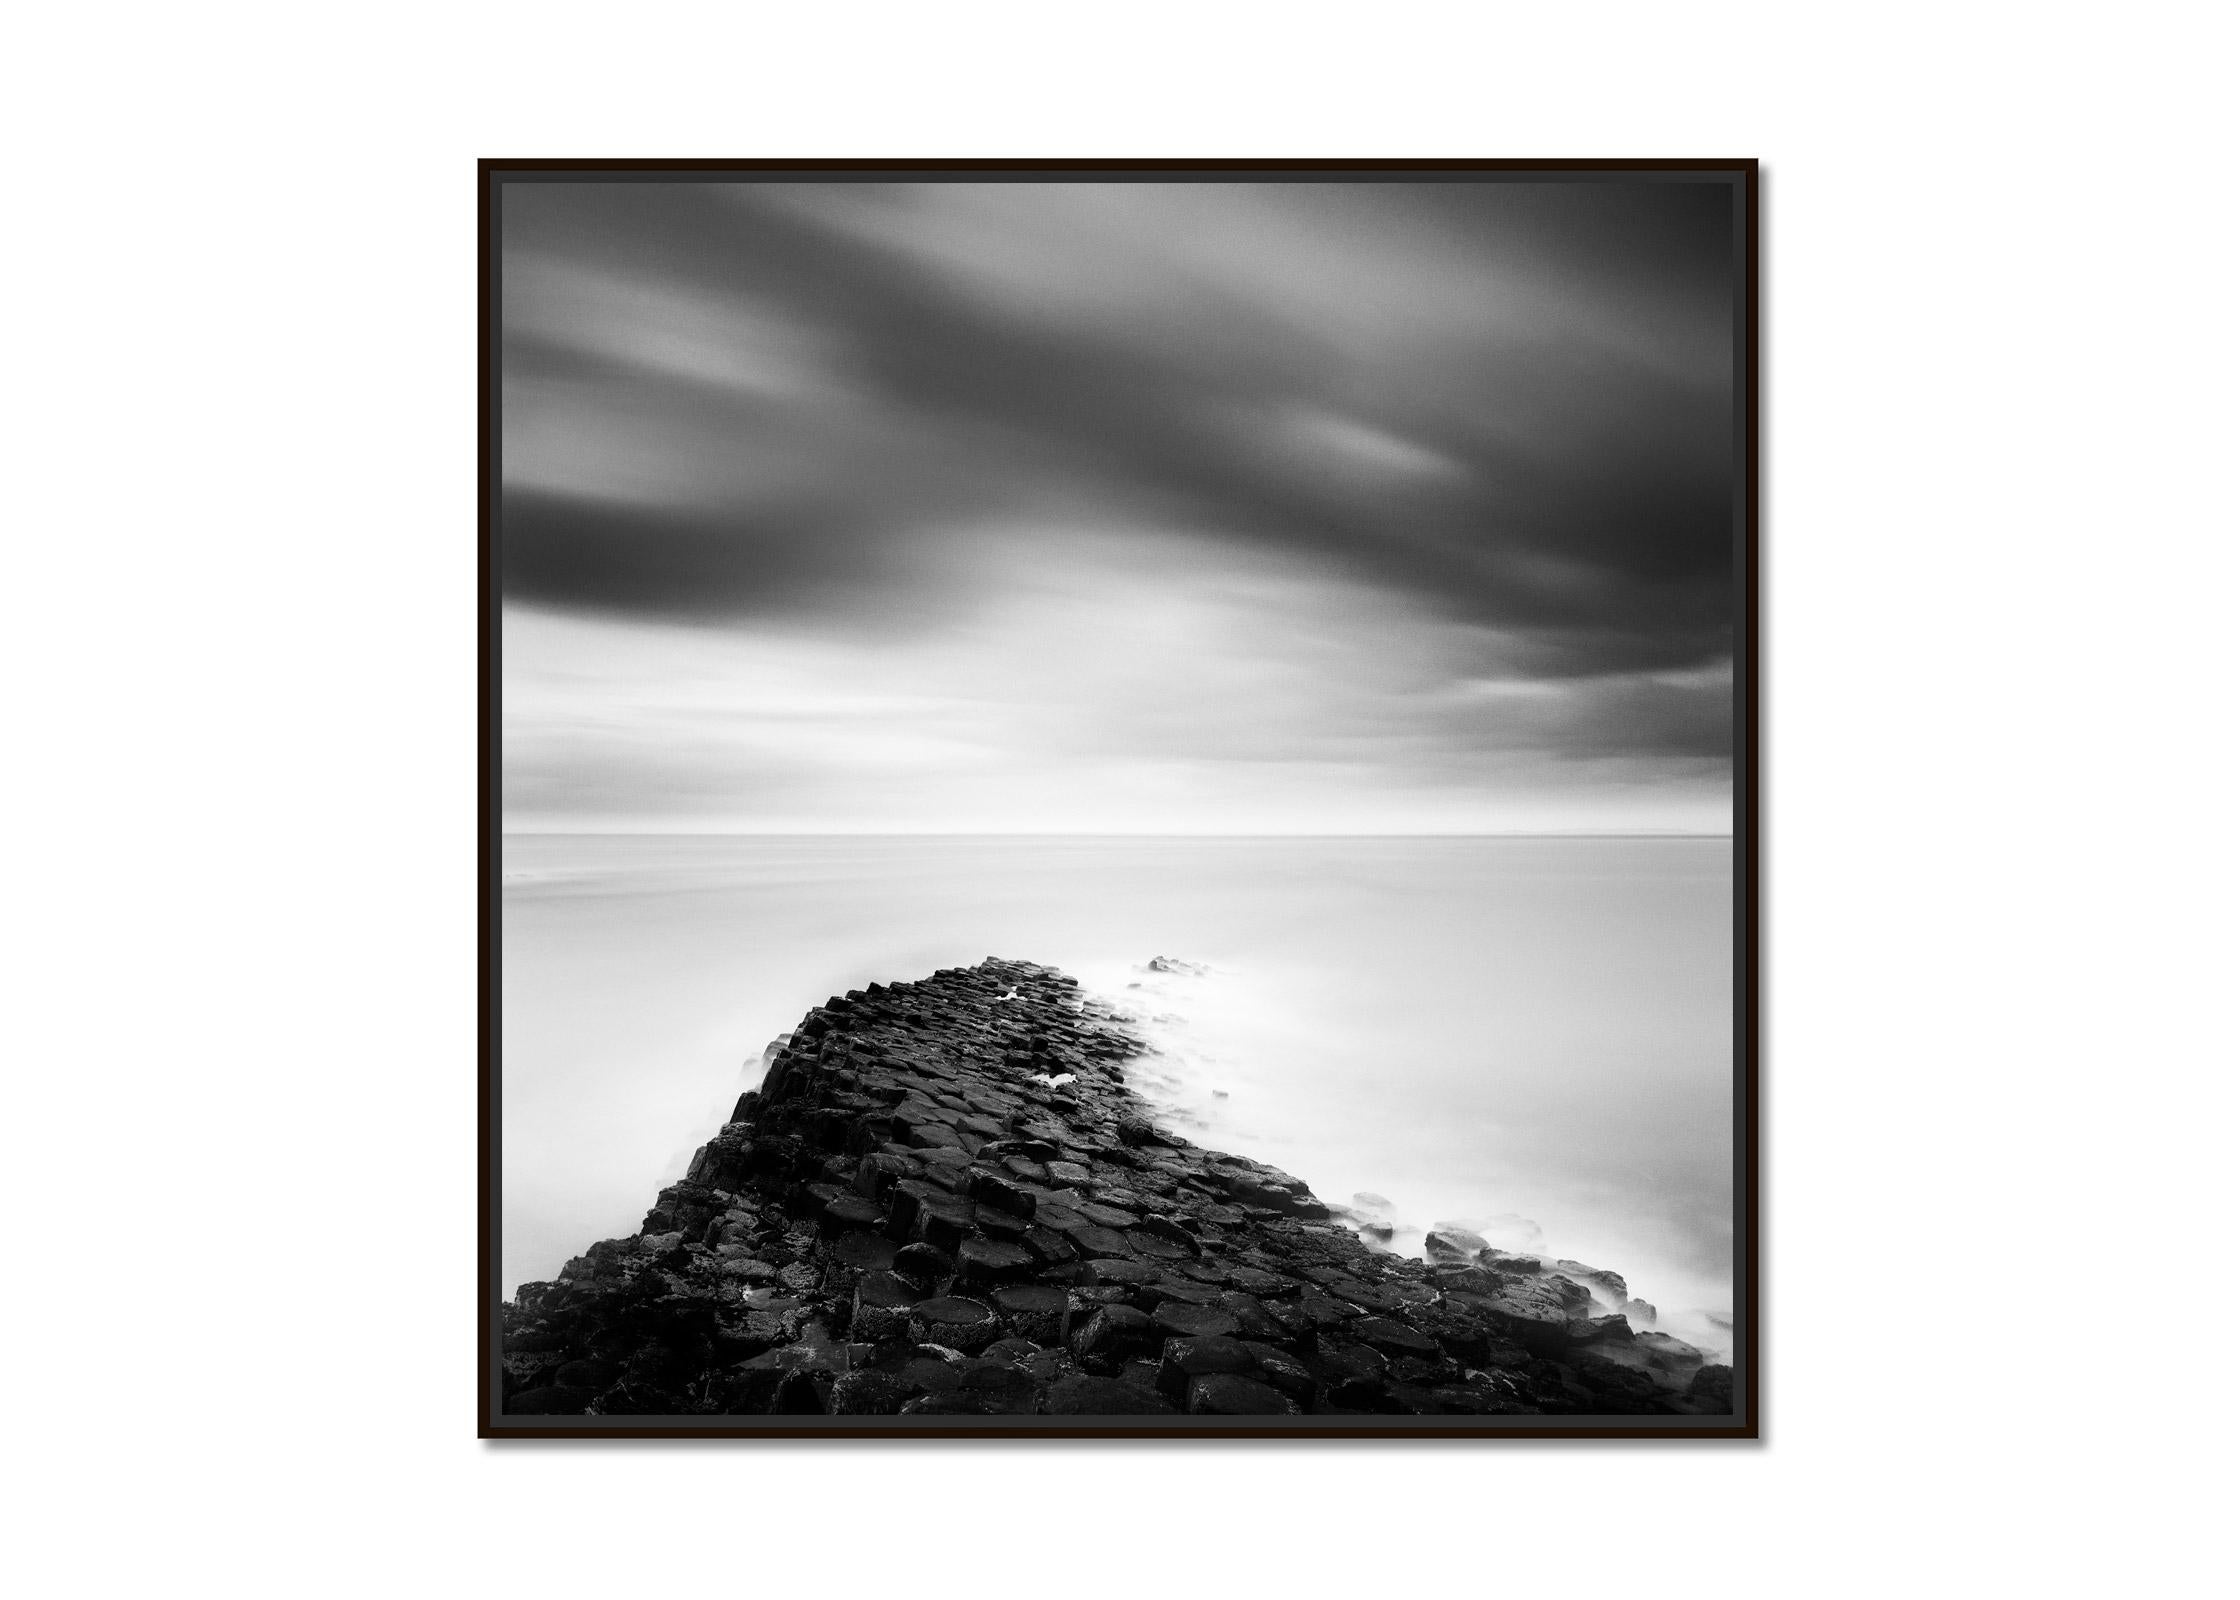 Giants Causeway, Coast, Ireland, black and white fine art landscape photography - Photograph by Gerald Berghammer